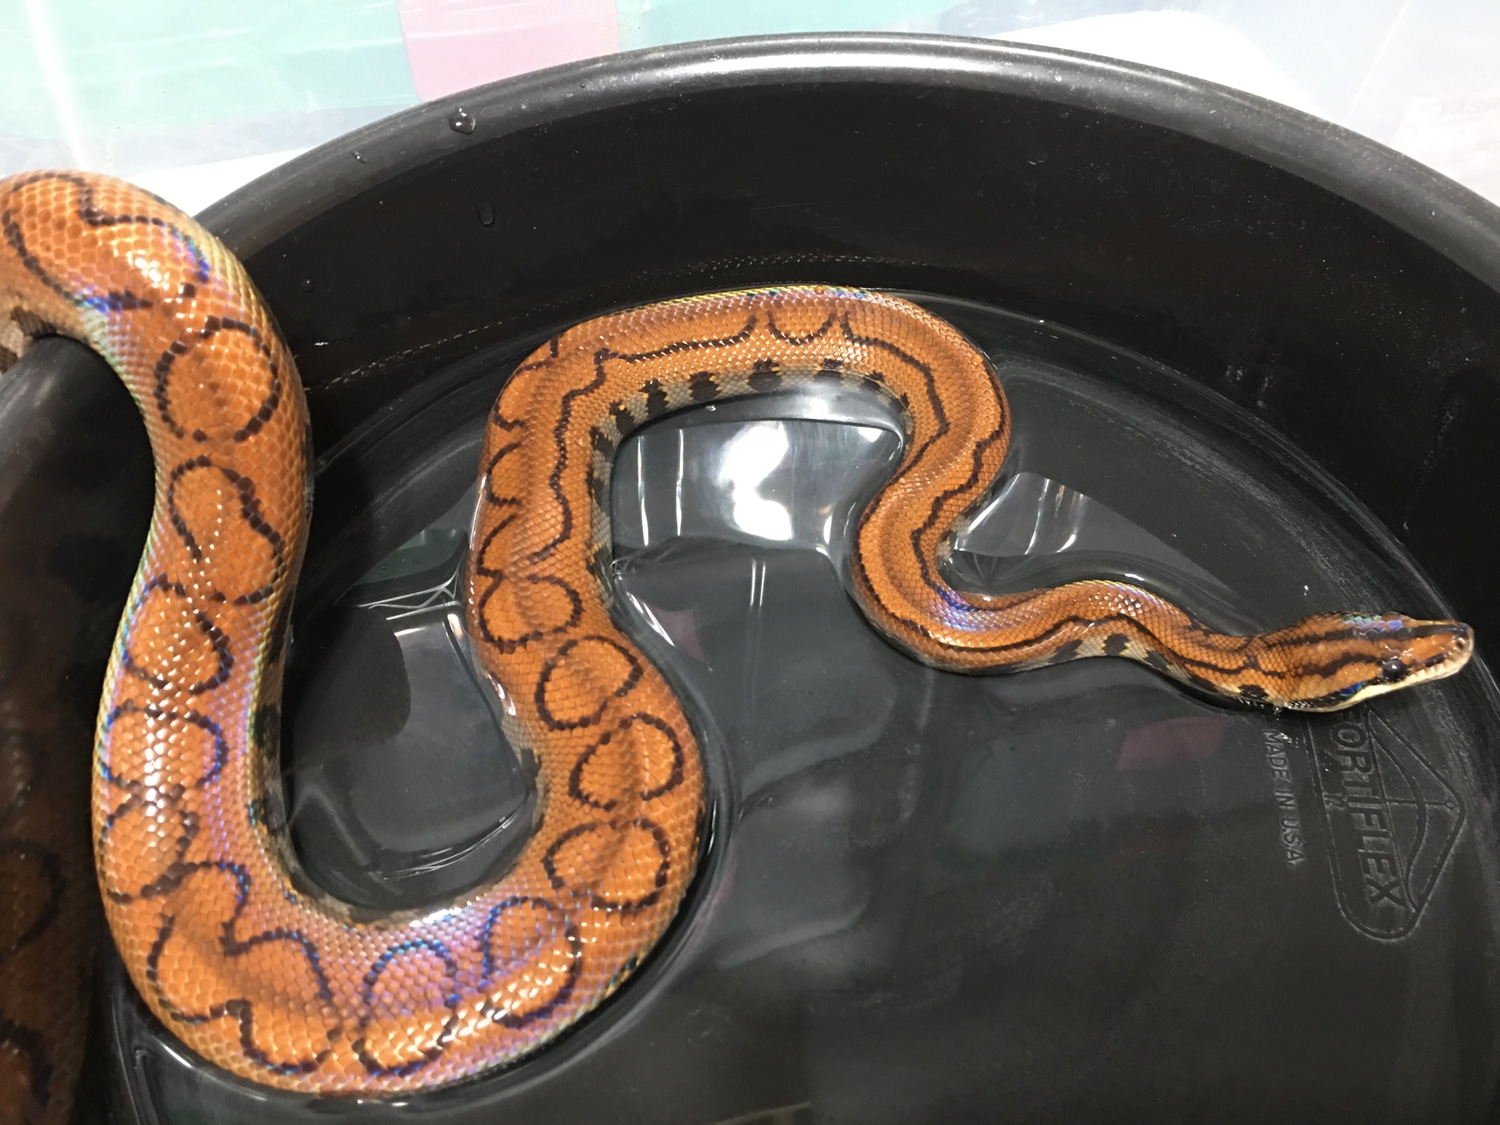 2015 Proven Male Pinstripe Brazilian Rainbow Boa by Reese Rainbows and Reptiles